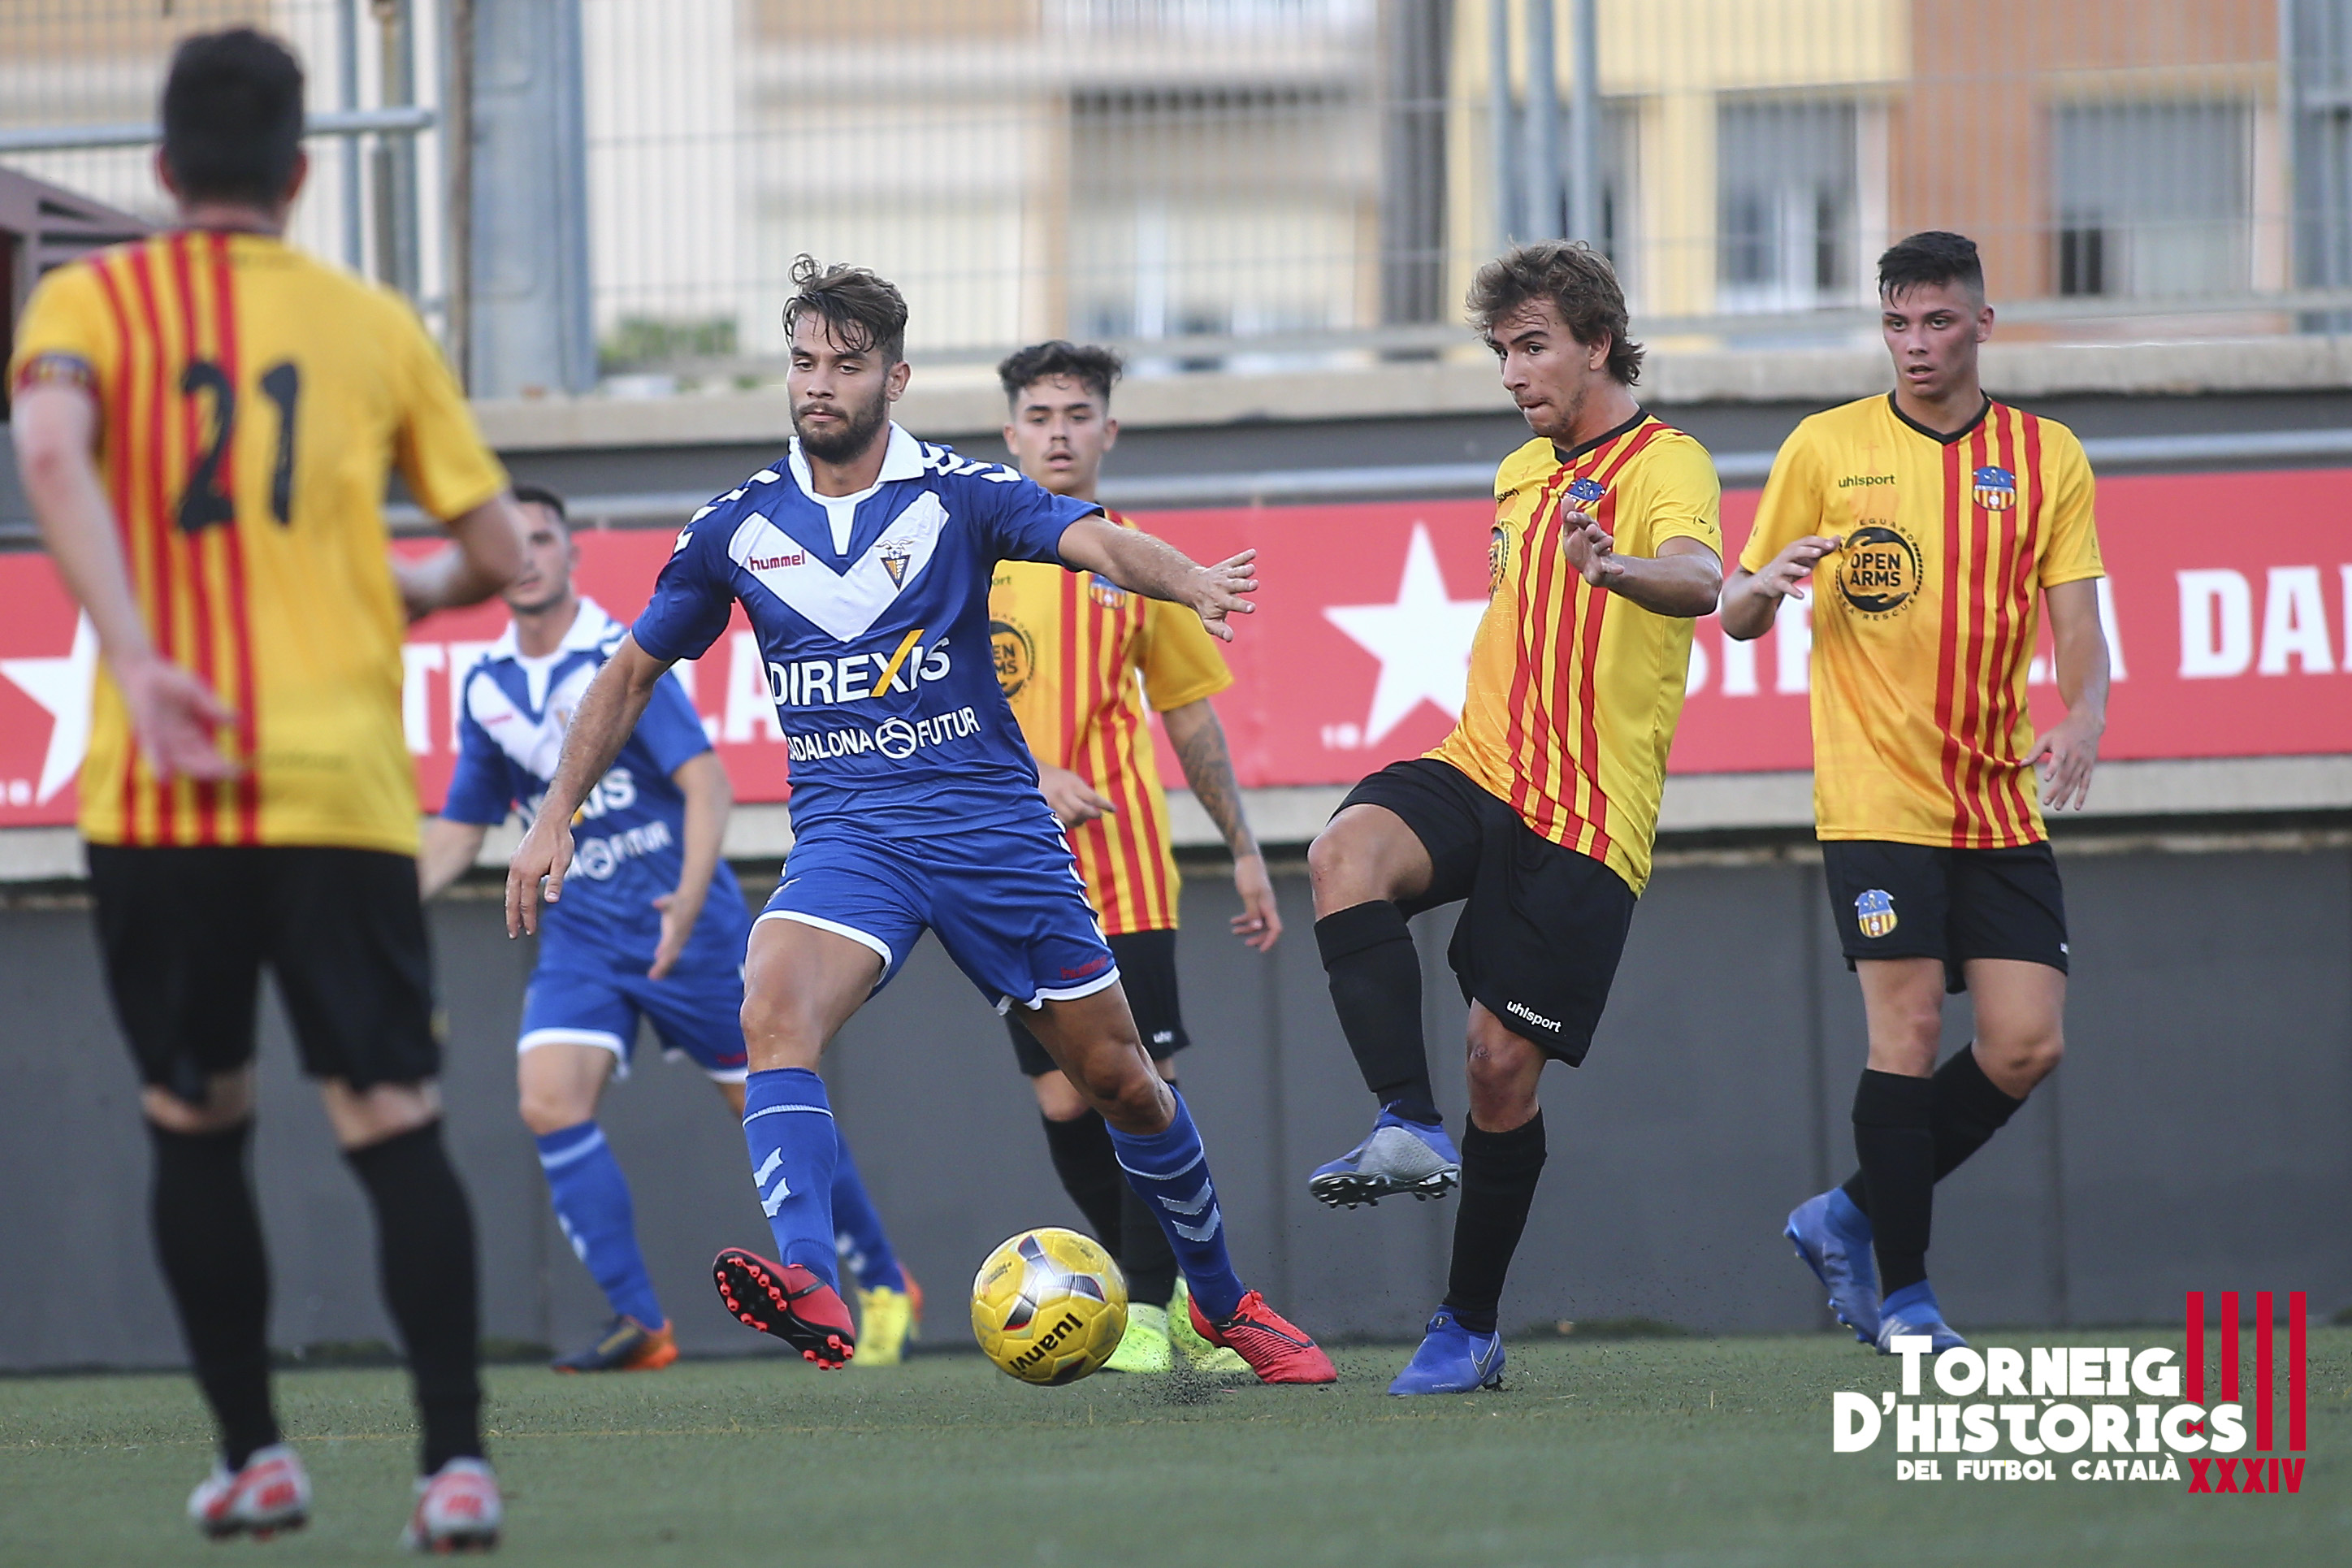 Players from Badalona and Sant Andreu go head to head on the first night of the 2019 Torneig d'Històrics. (Photo: Torneig d'Històrics)